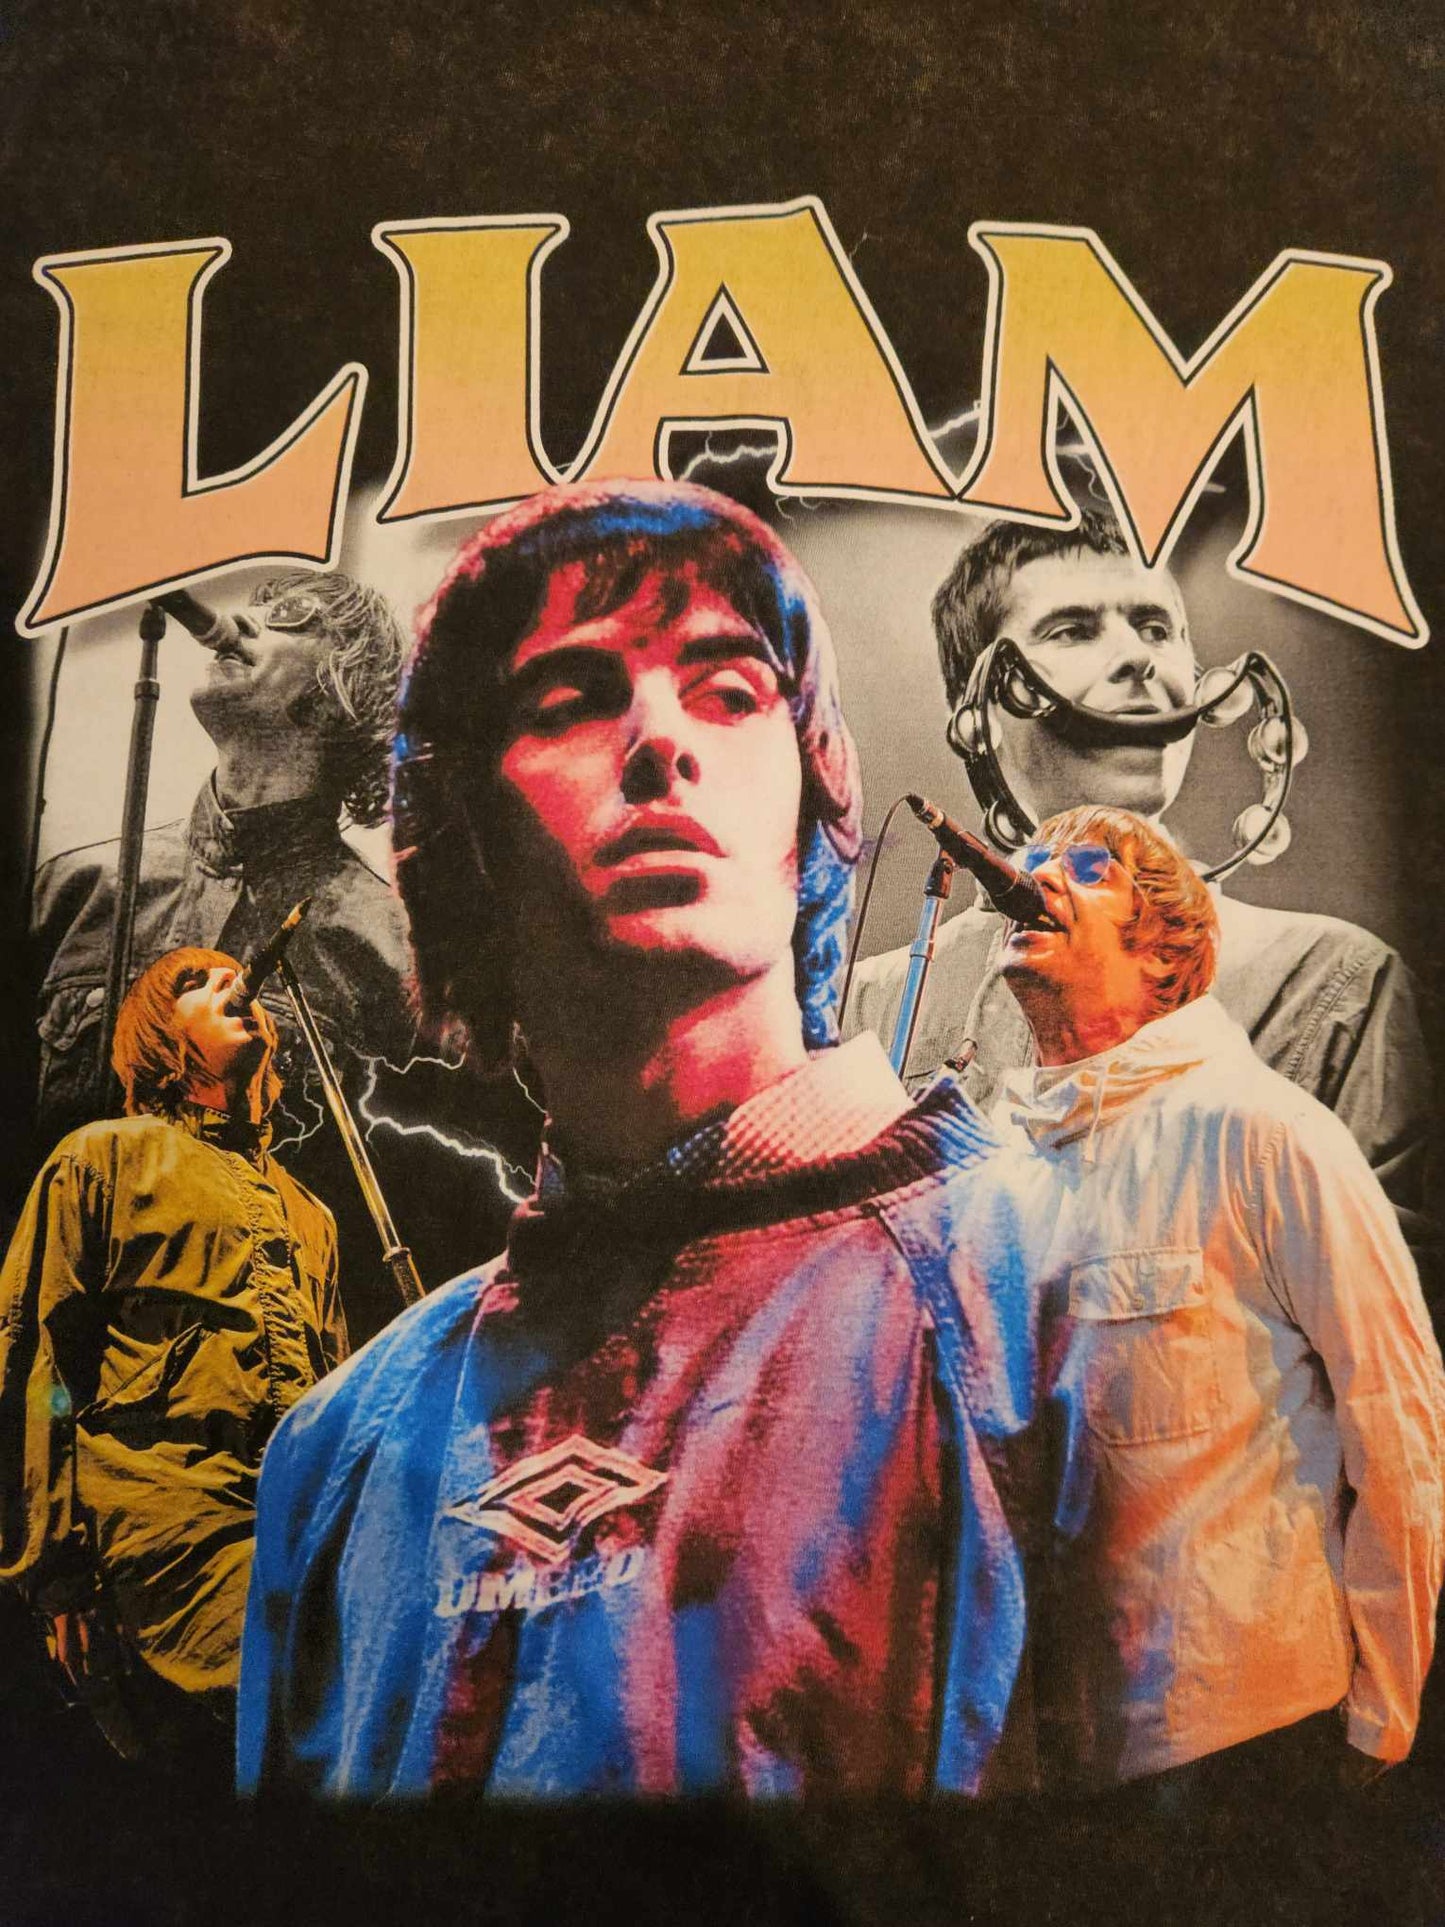 THE LIAM GALLAGHER